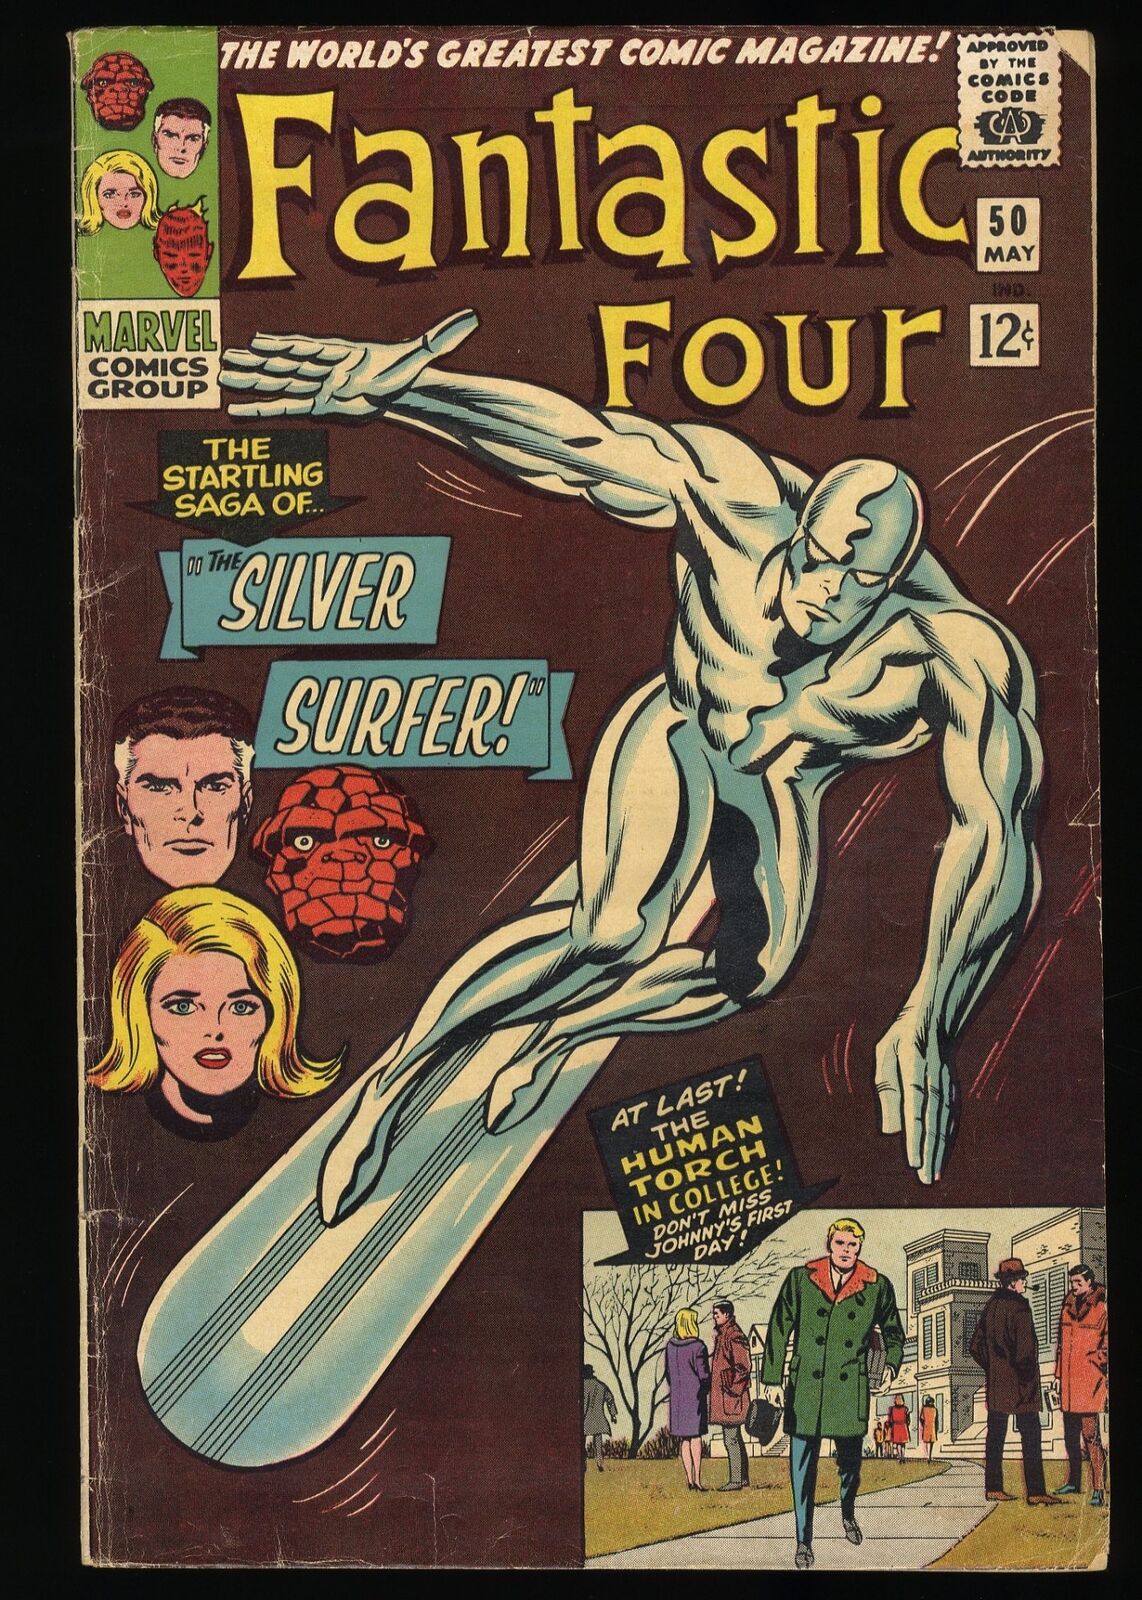 Fantastic Four #50 VG+ 4.5 3rd Appearance Silver Surfer Human Torch Marvel